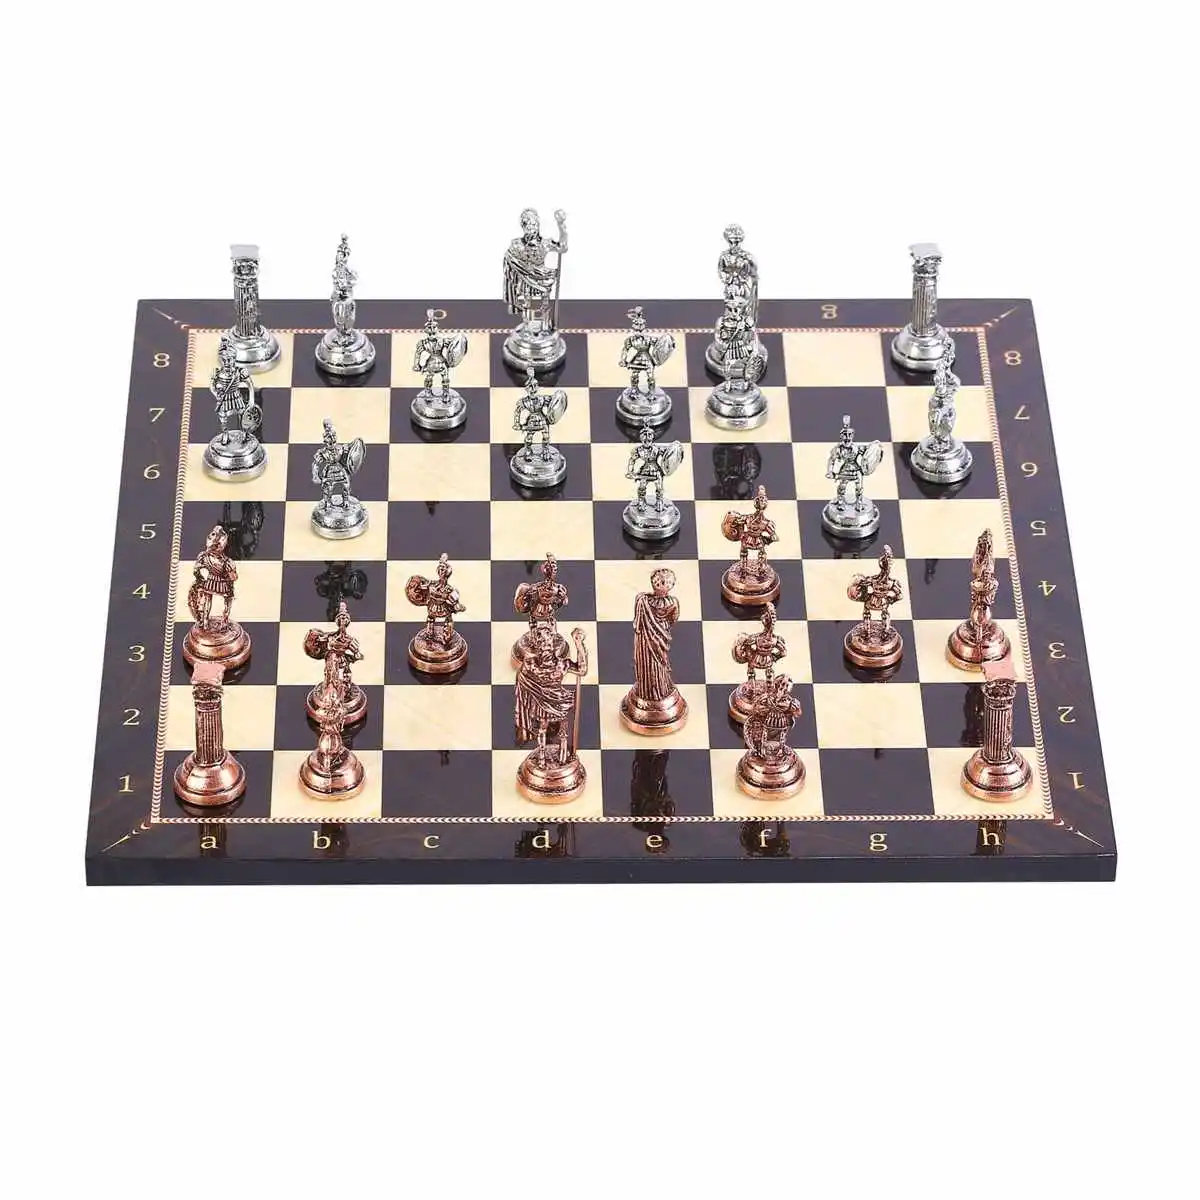 Antique Copper Rome Figures Metal Chess Set, Handmade Pieces, Handmade Pieces, Patterned Wood Chess Board Small Size King 4.8cm